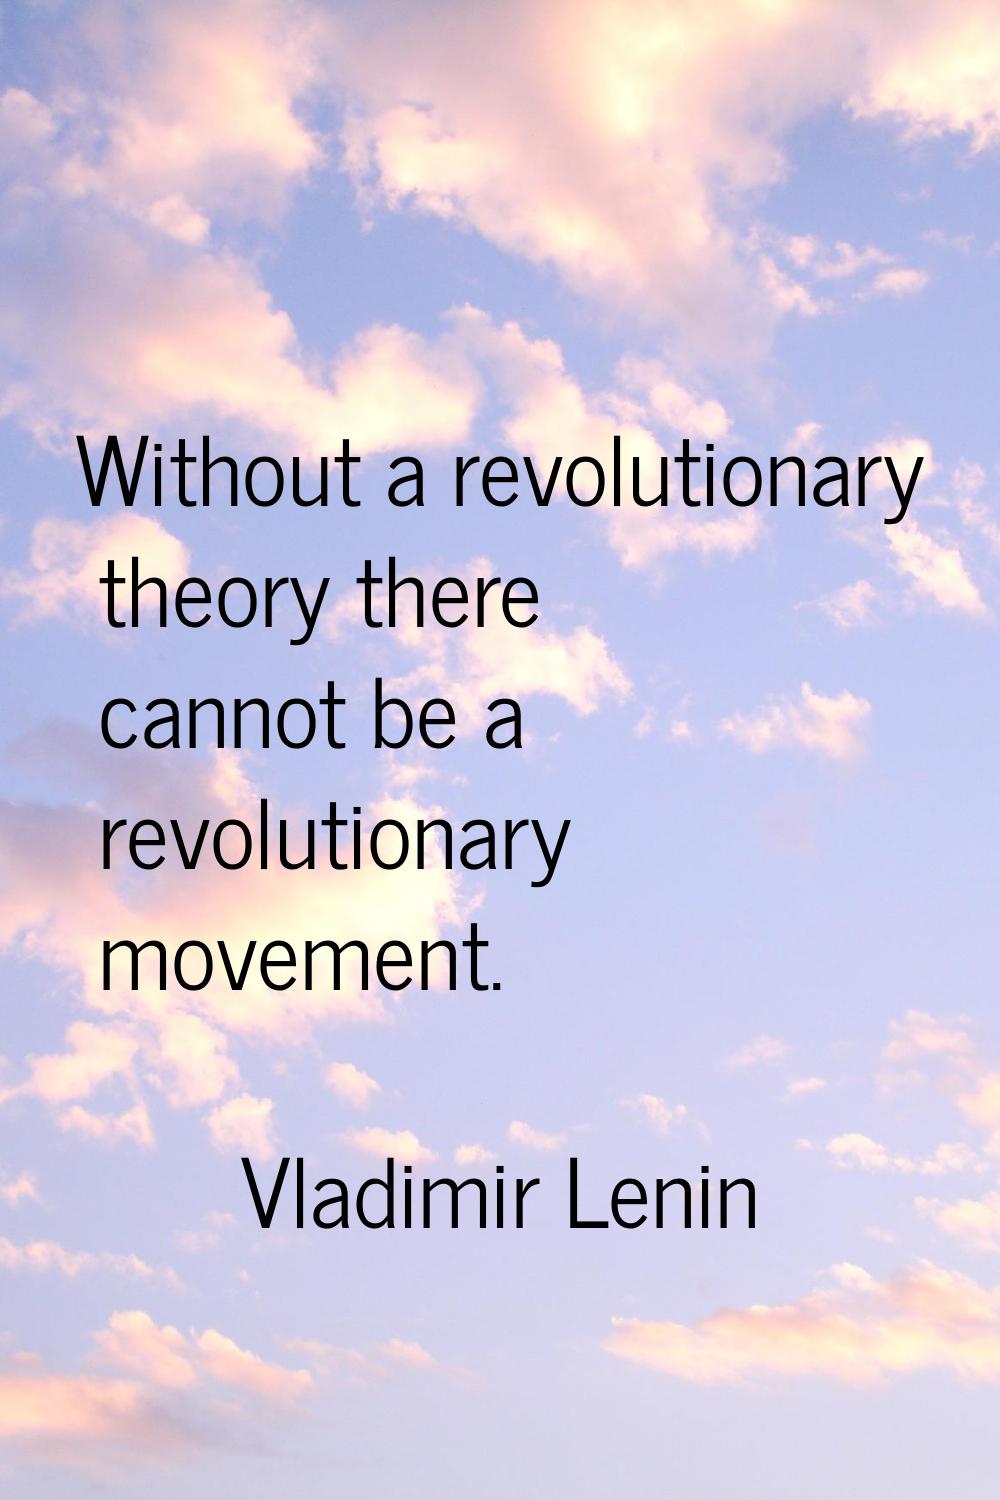 Without a revolutionary theory there cannot be a revolutionary movement.